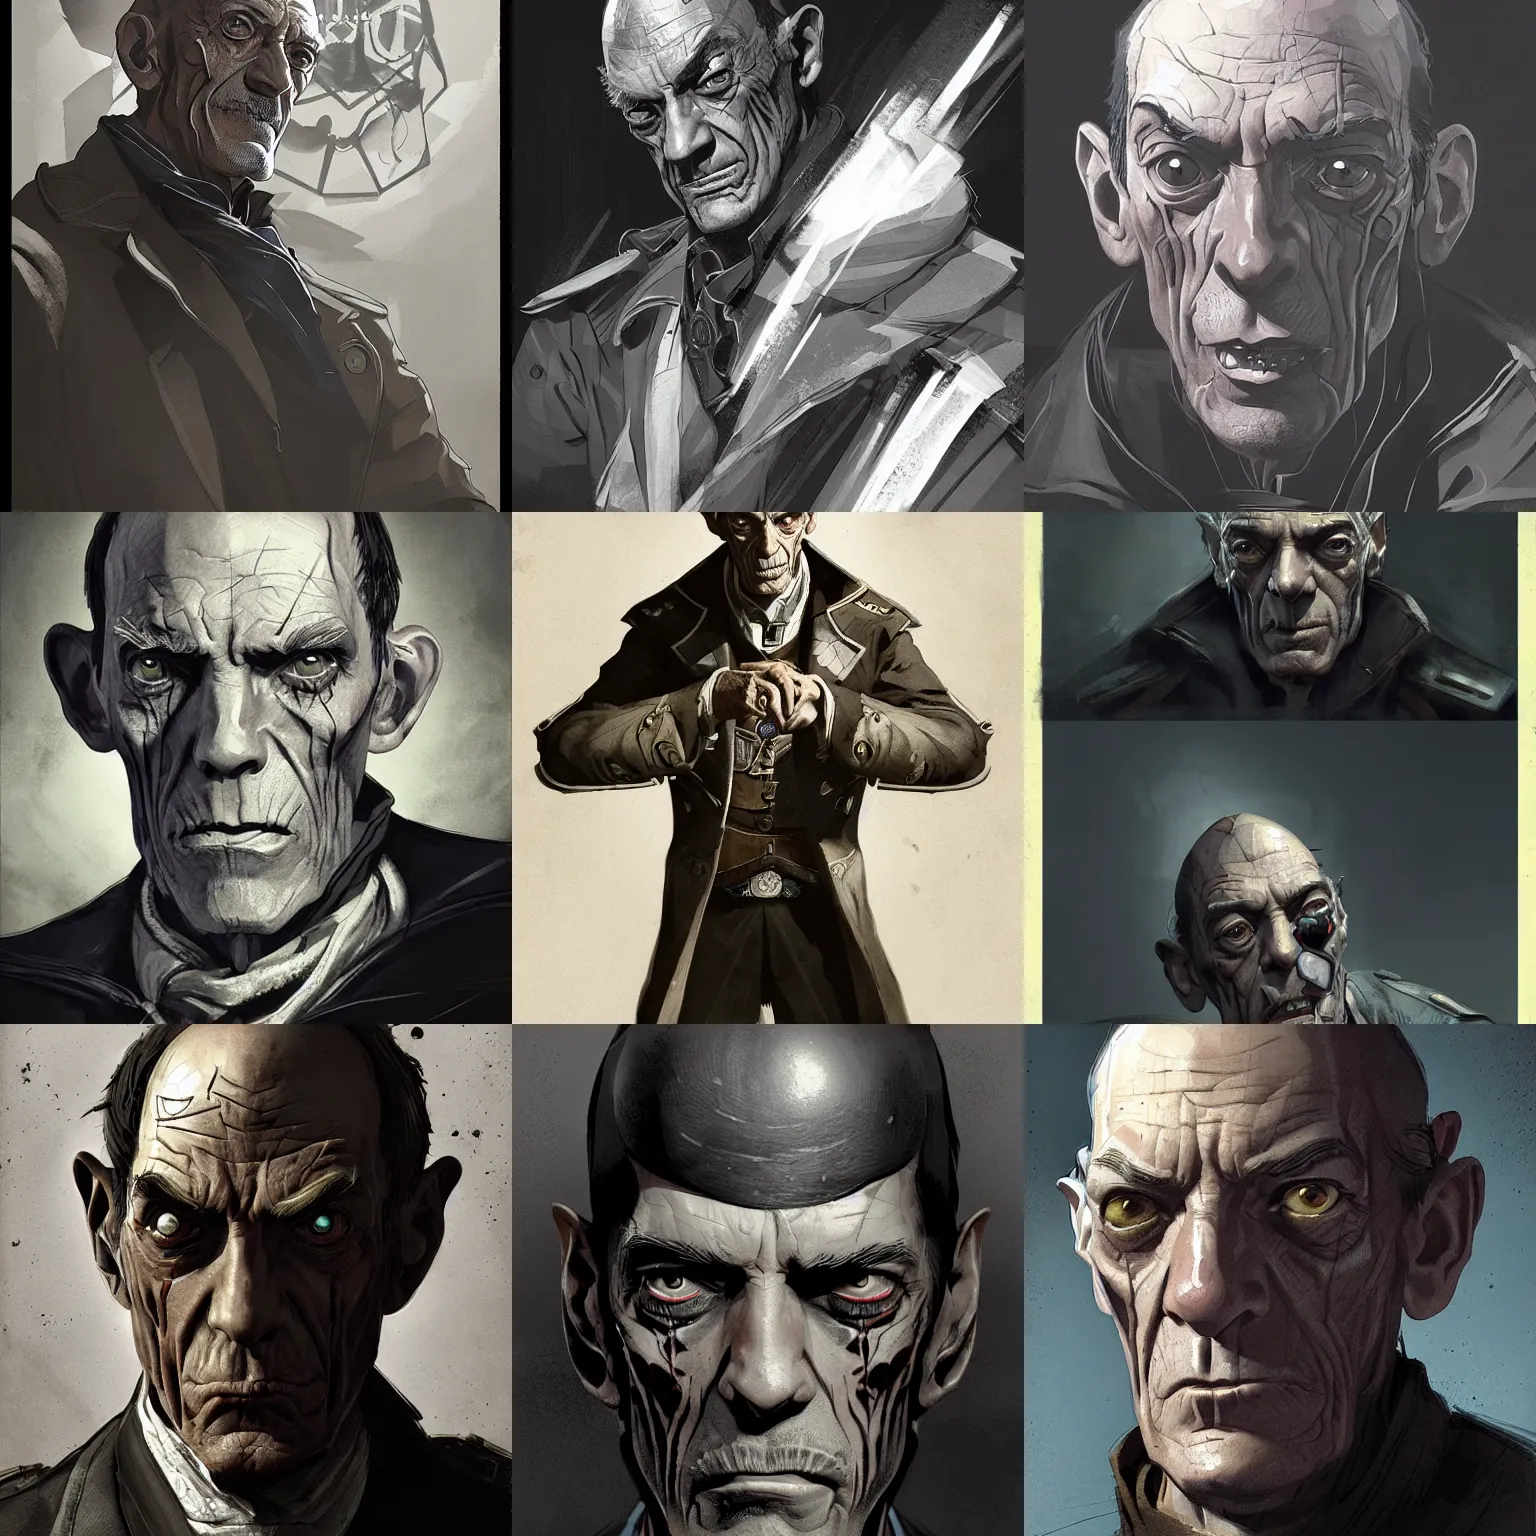 Prompt: an illustration of hector salamanca by cedric peyravernay. dishonored concept art. amazing details, dramatic lighting. stylized